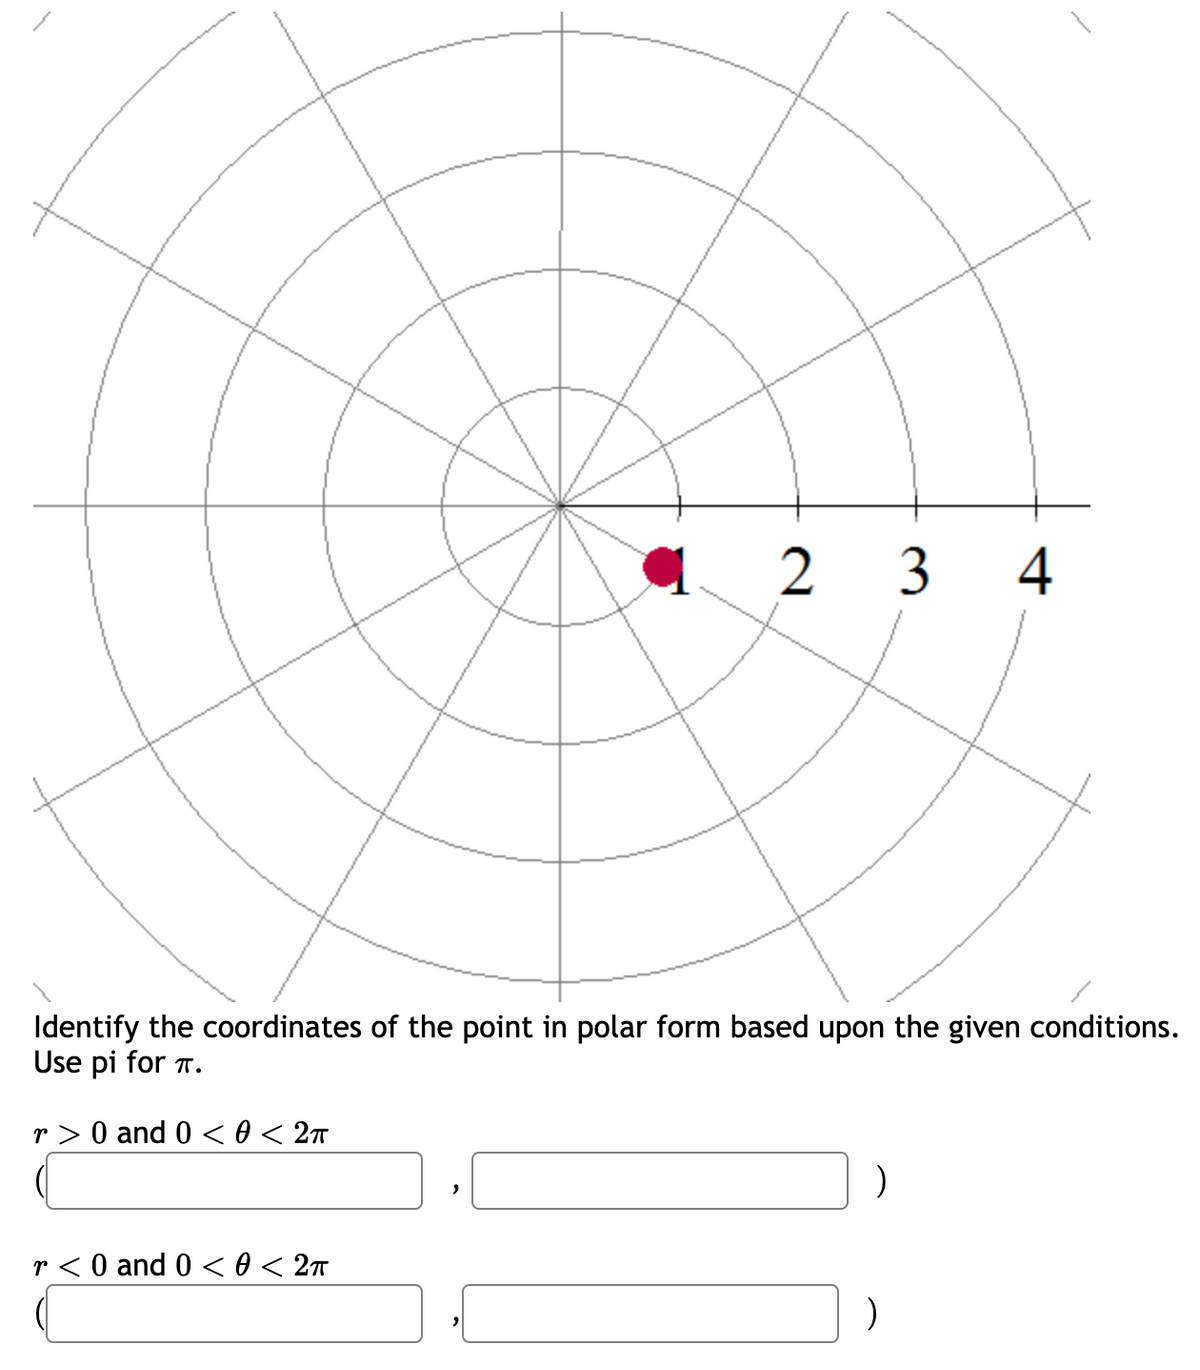 23 4
Identify the coordinates of the point in polar form based upon the given conditions.
Use pi for T.
r> 0 and 0 <0 < 2π
r< 0 and 0 <0 < 2π
)